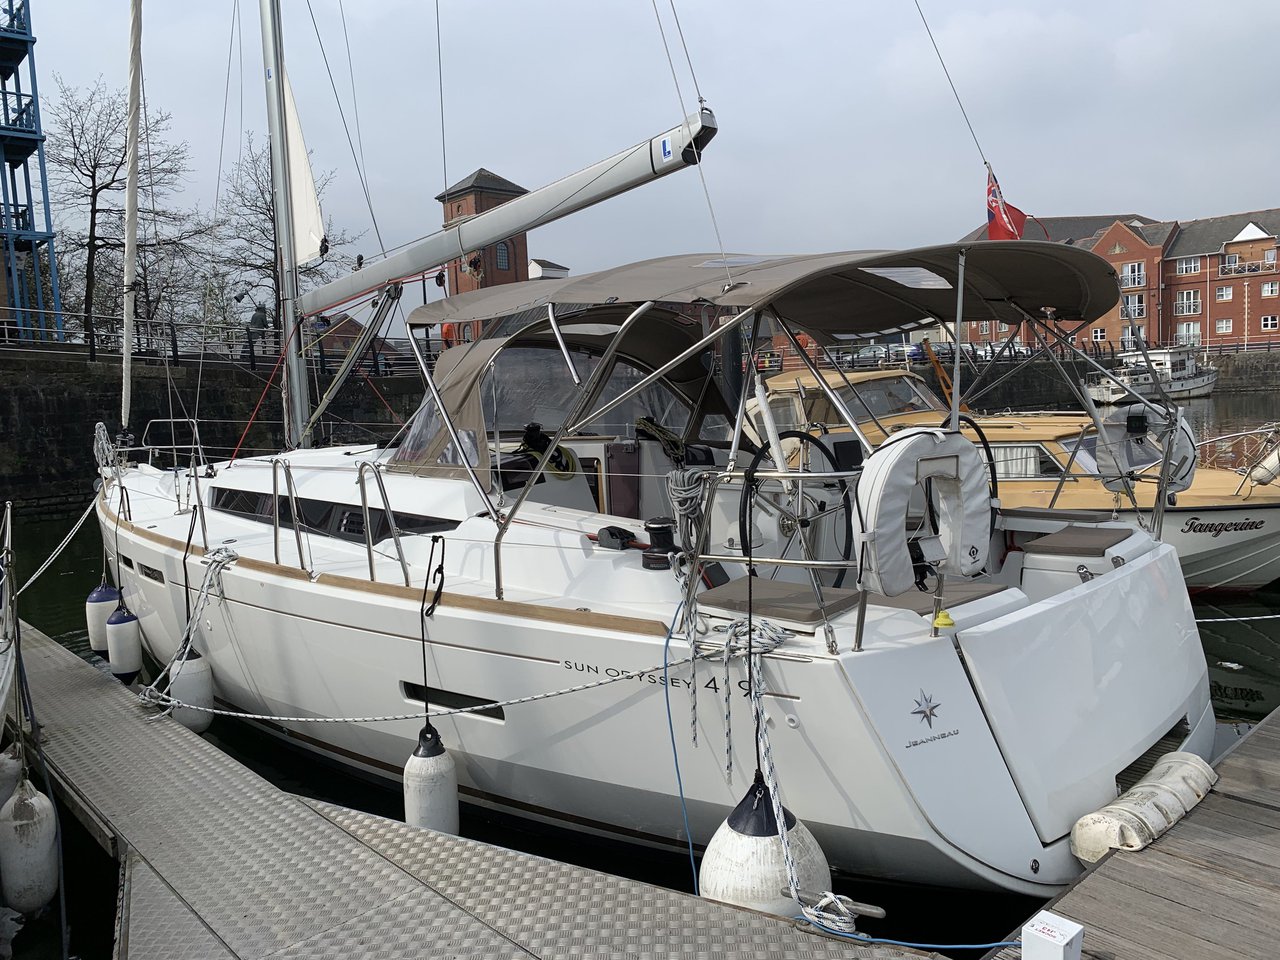 Sun Odyssey 419 - Yacht Charter Firth of Clyde & Boat hire in United Kingdom Scotland Firth of Clyde Largs Largs Yacht Haven 1